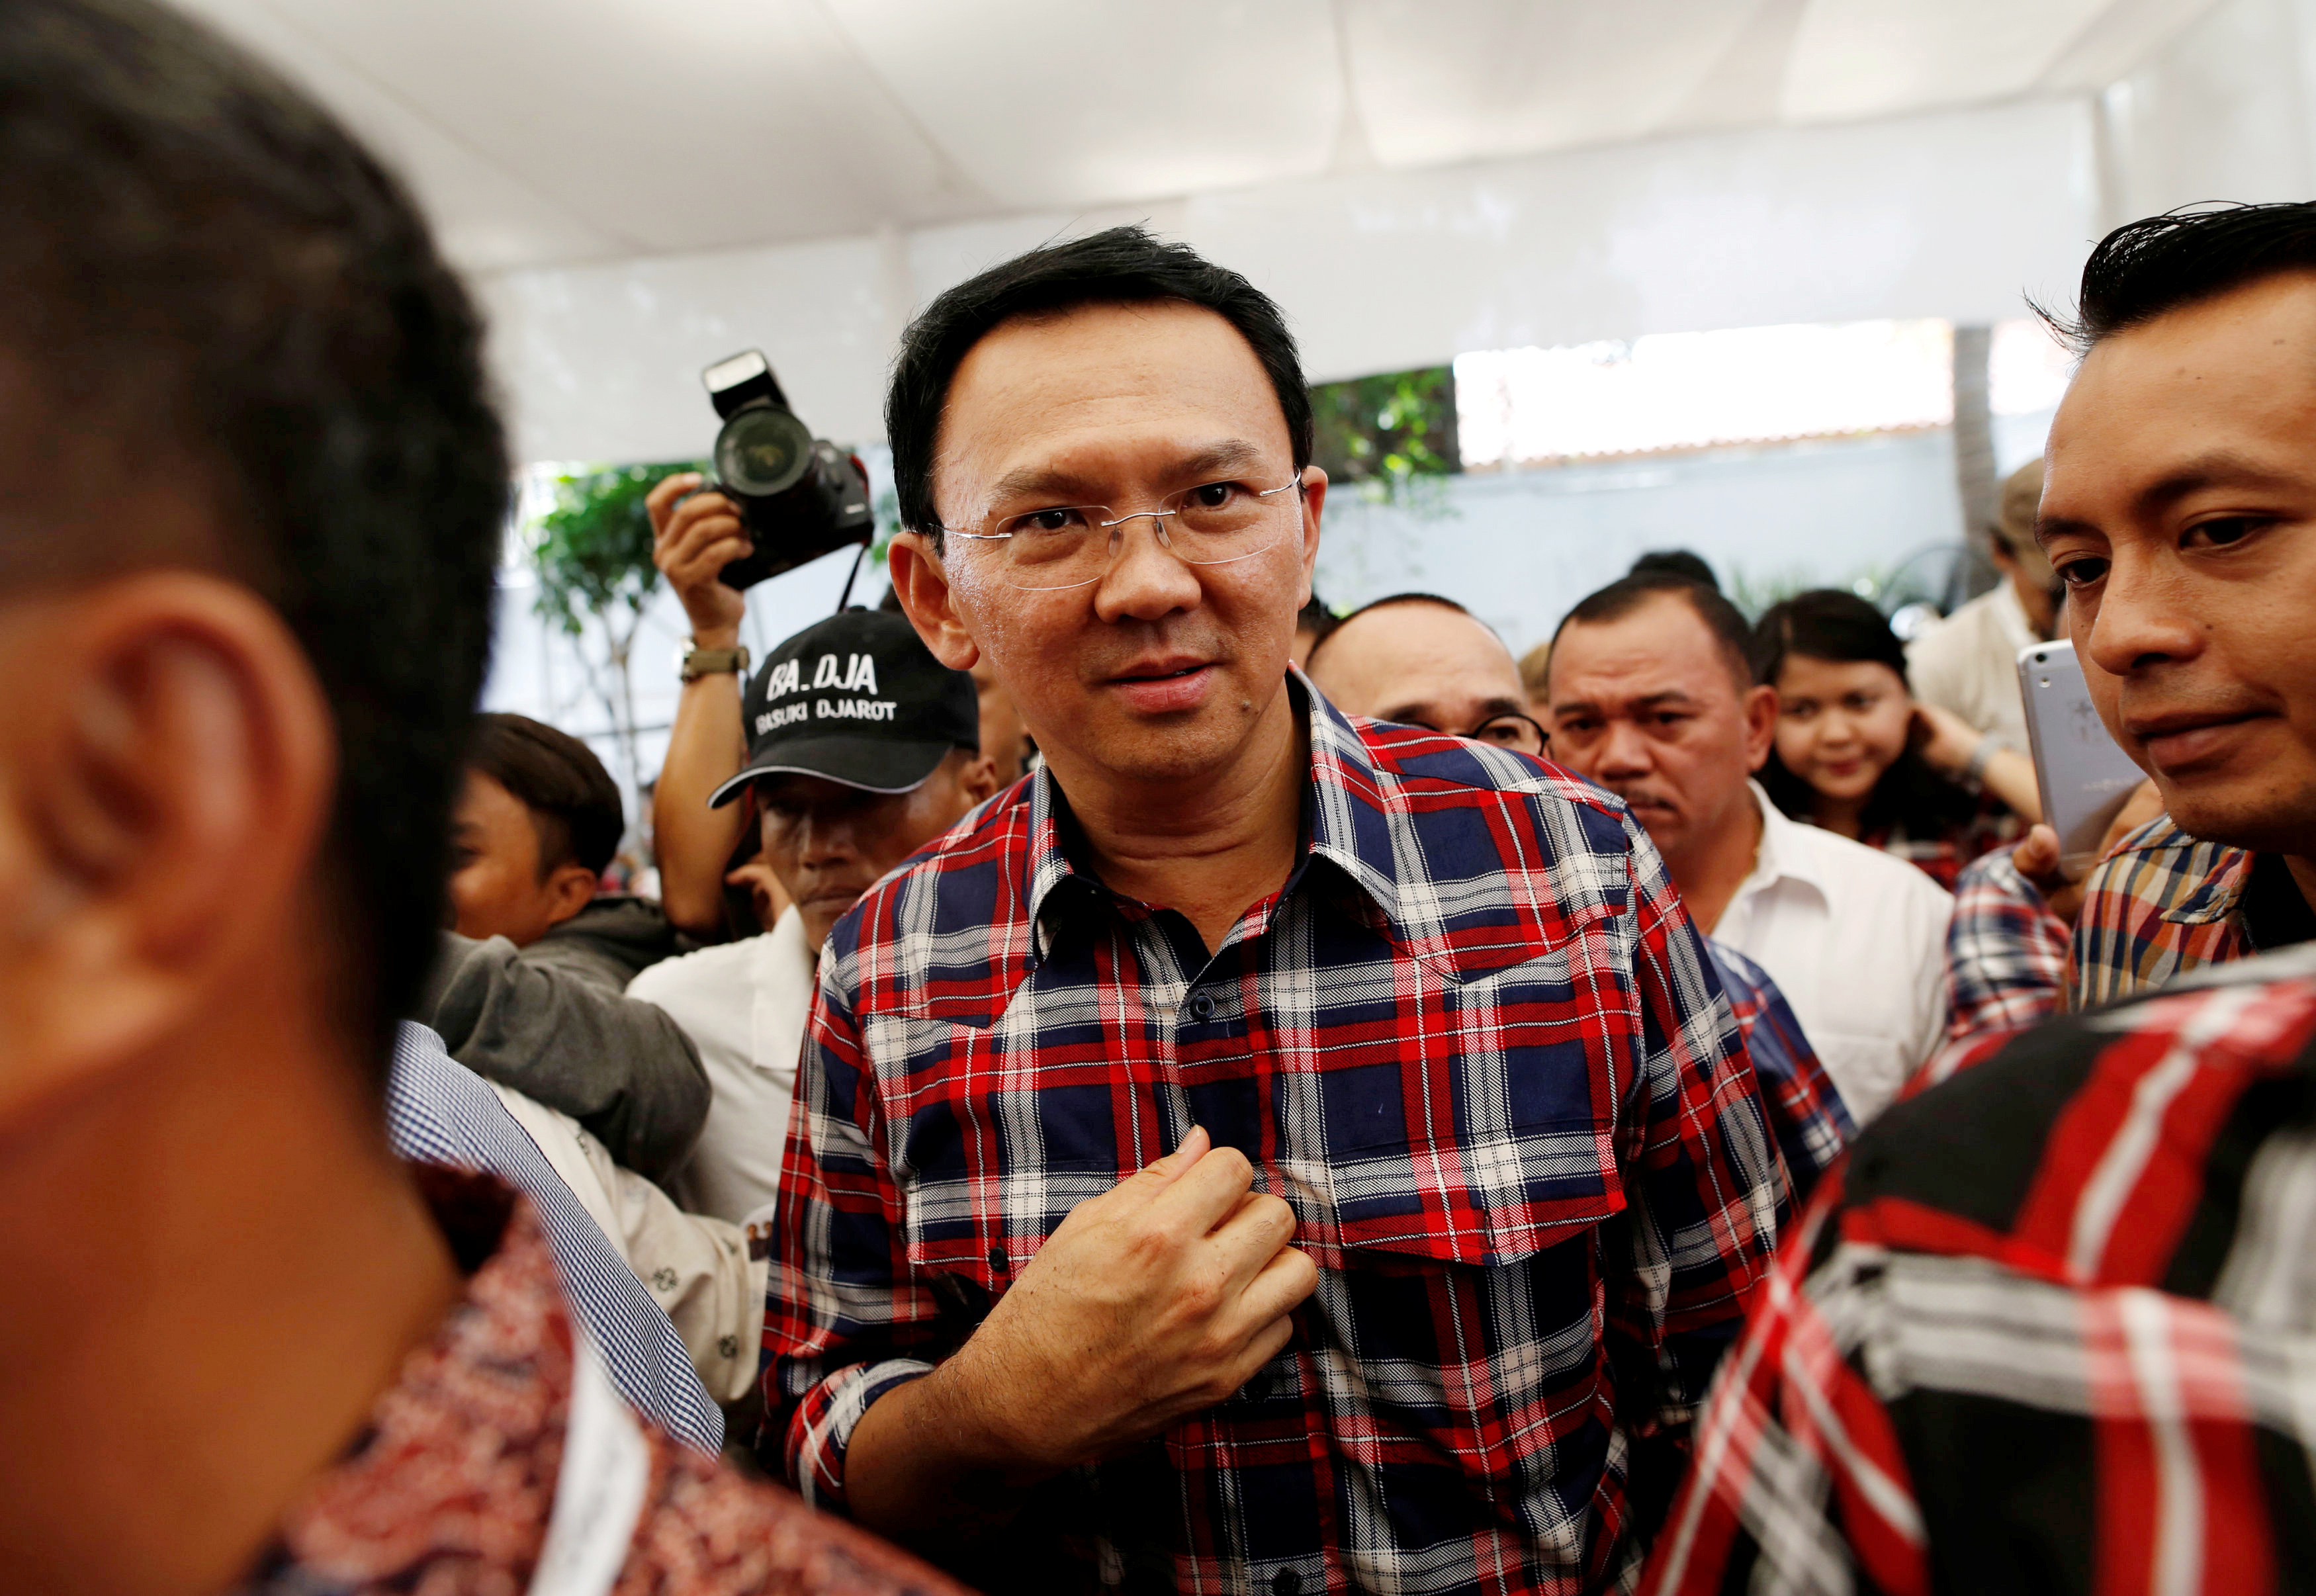 Jakarta Governor Basuki Tjahaja Purnama, nicknamed "Ahok", leaves the stage after meeting with supporters while campaigning for the upcoming election for governor in Jakarta